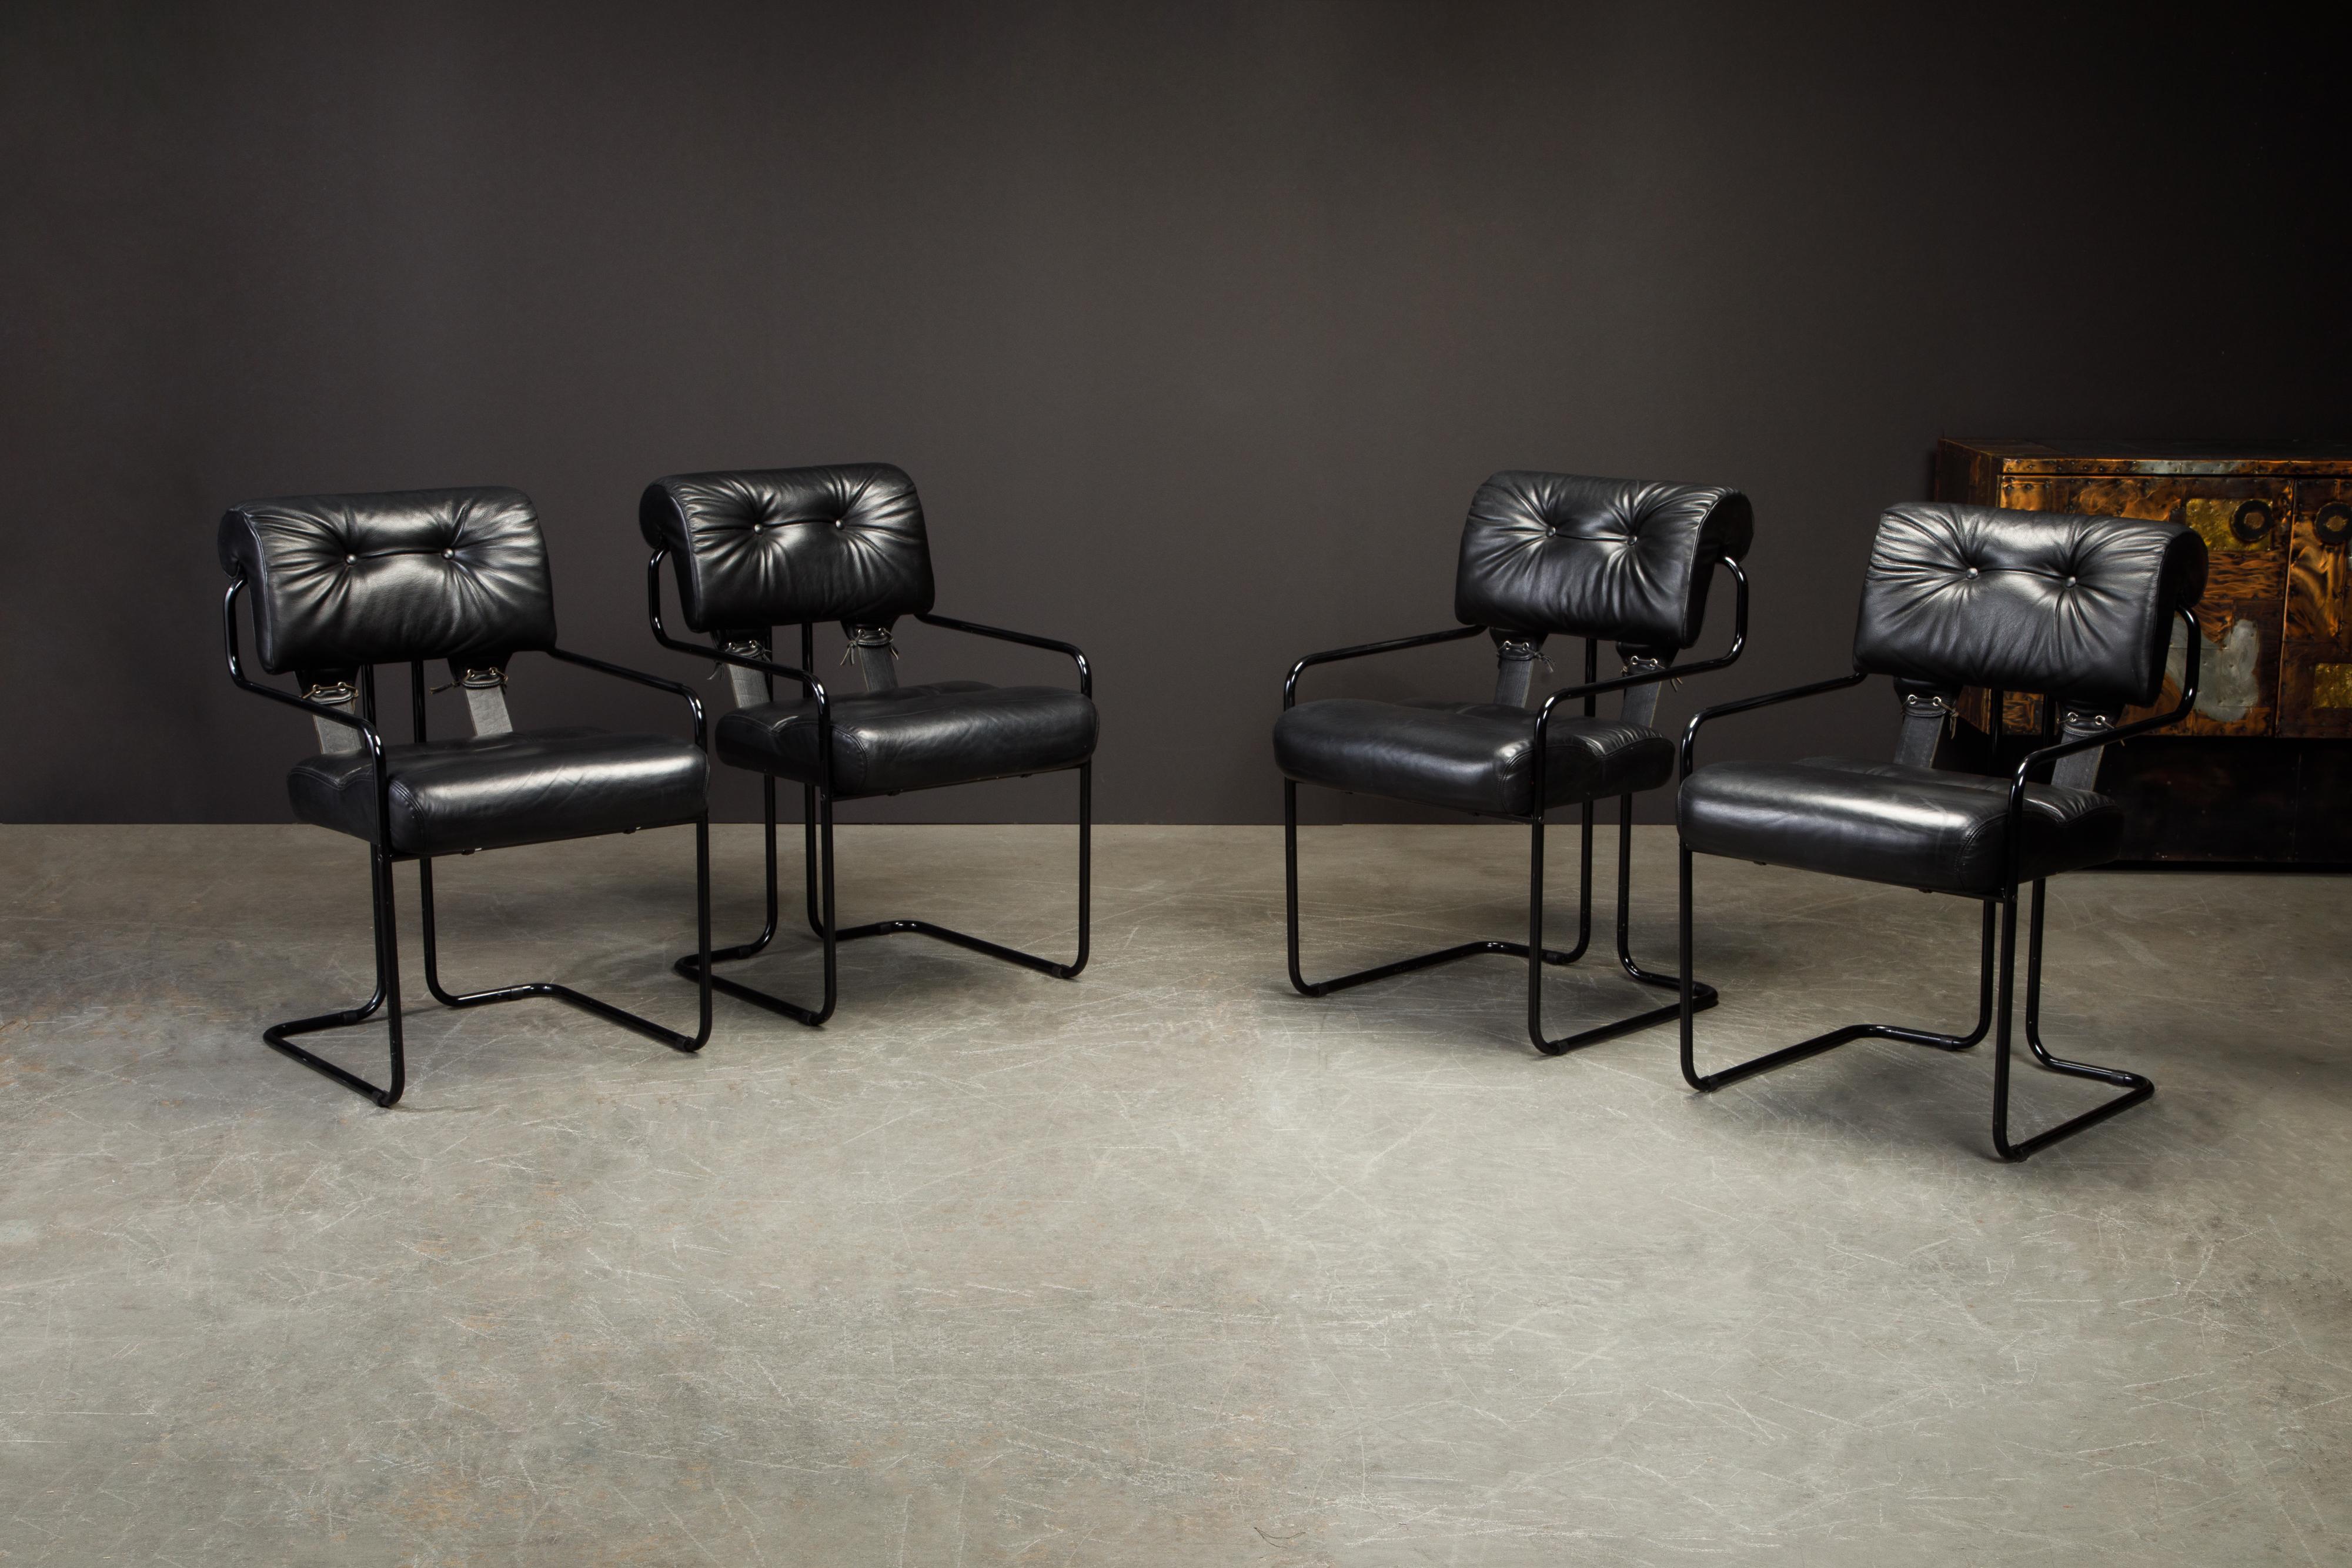 Currently, the most coveted dining chairs by interior designers are the 'Tucroma' chairs by Guido Faleschini for i4 Mariani, and we have this incredible set of four (4) vintage Tucroma armchairs in beautiful black leather with rare black frames